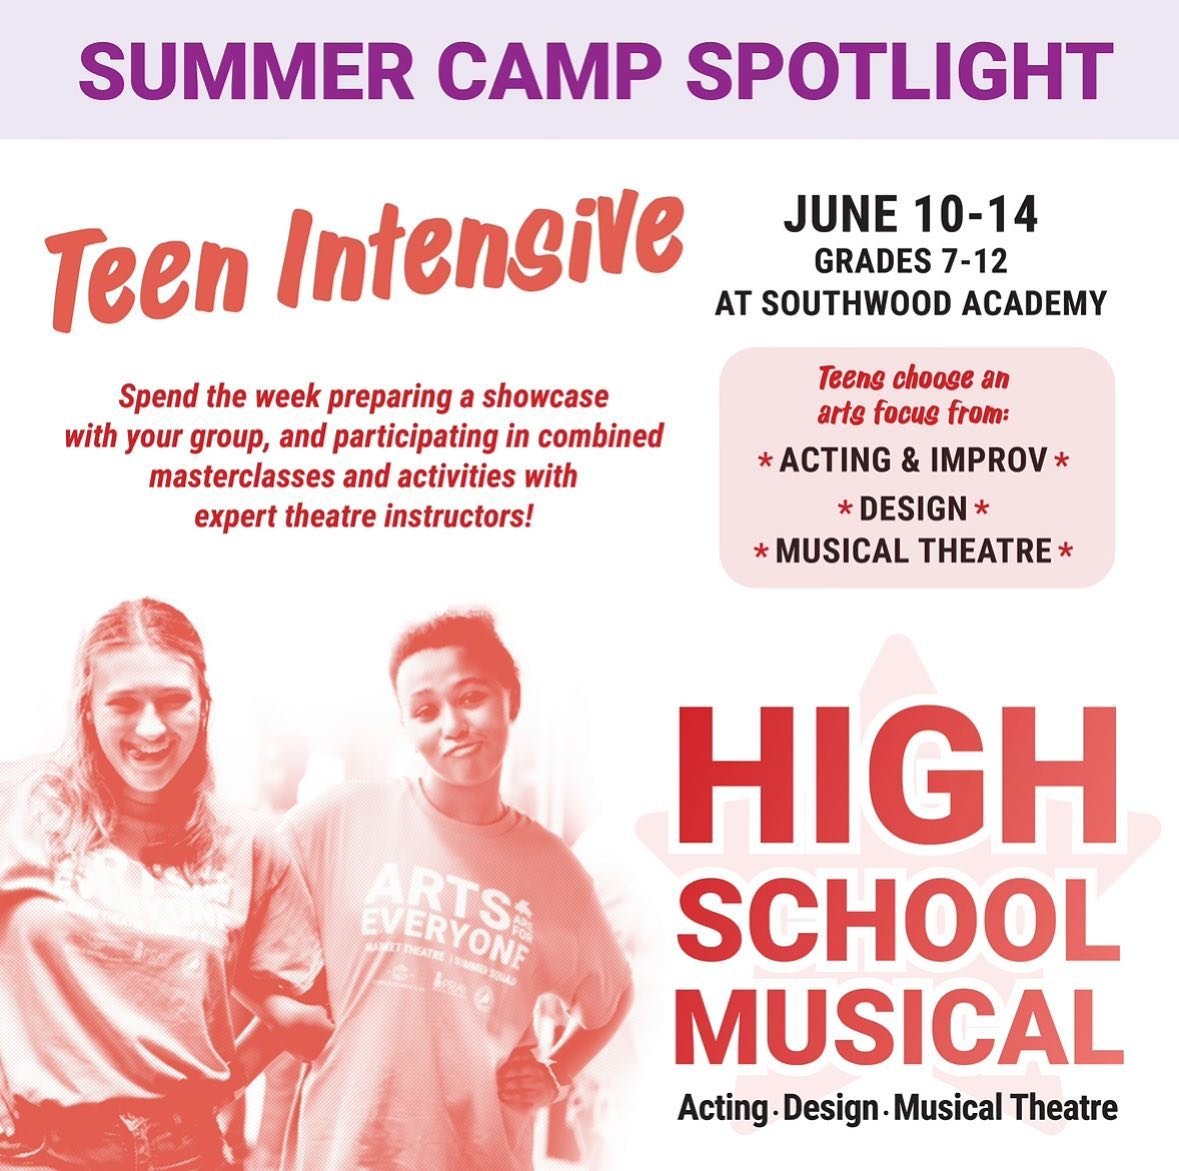 SUMMER CAMP SPOTLIGHT: Teen Intensive! ⭐️ 

This summer we&rsquo;re rolling out a brand new program for teens that&rsquo;s sure to be challenging, exciting, and a ton of fun &mdash; Teen Intensive: High School Musical. 

Teens will choose their focus